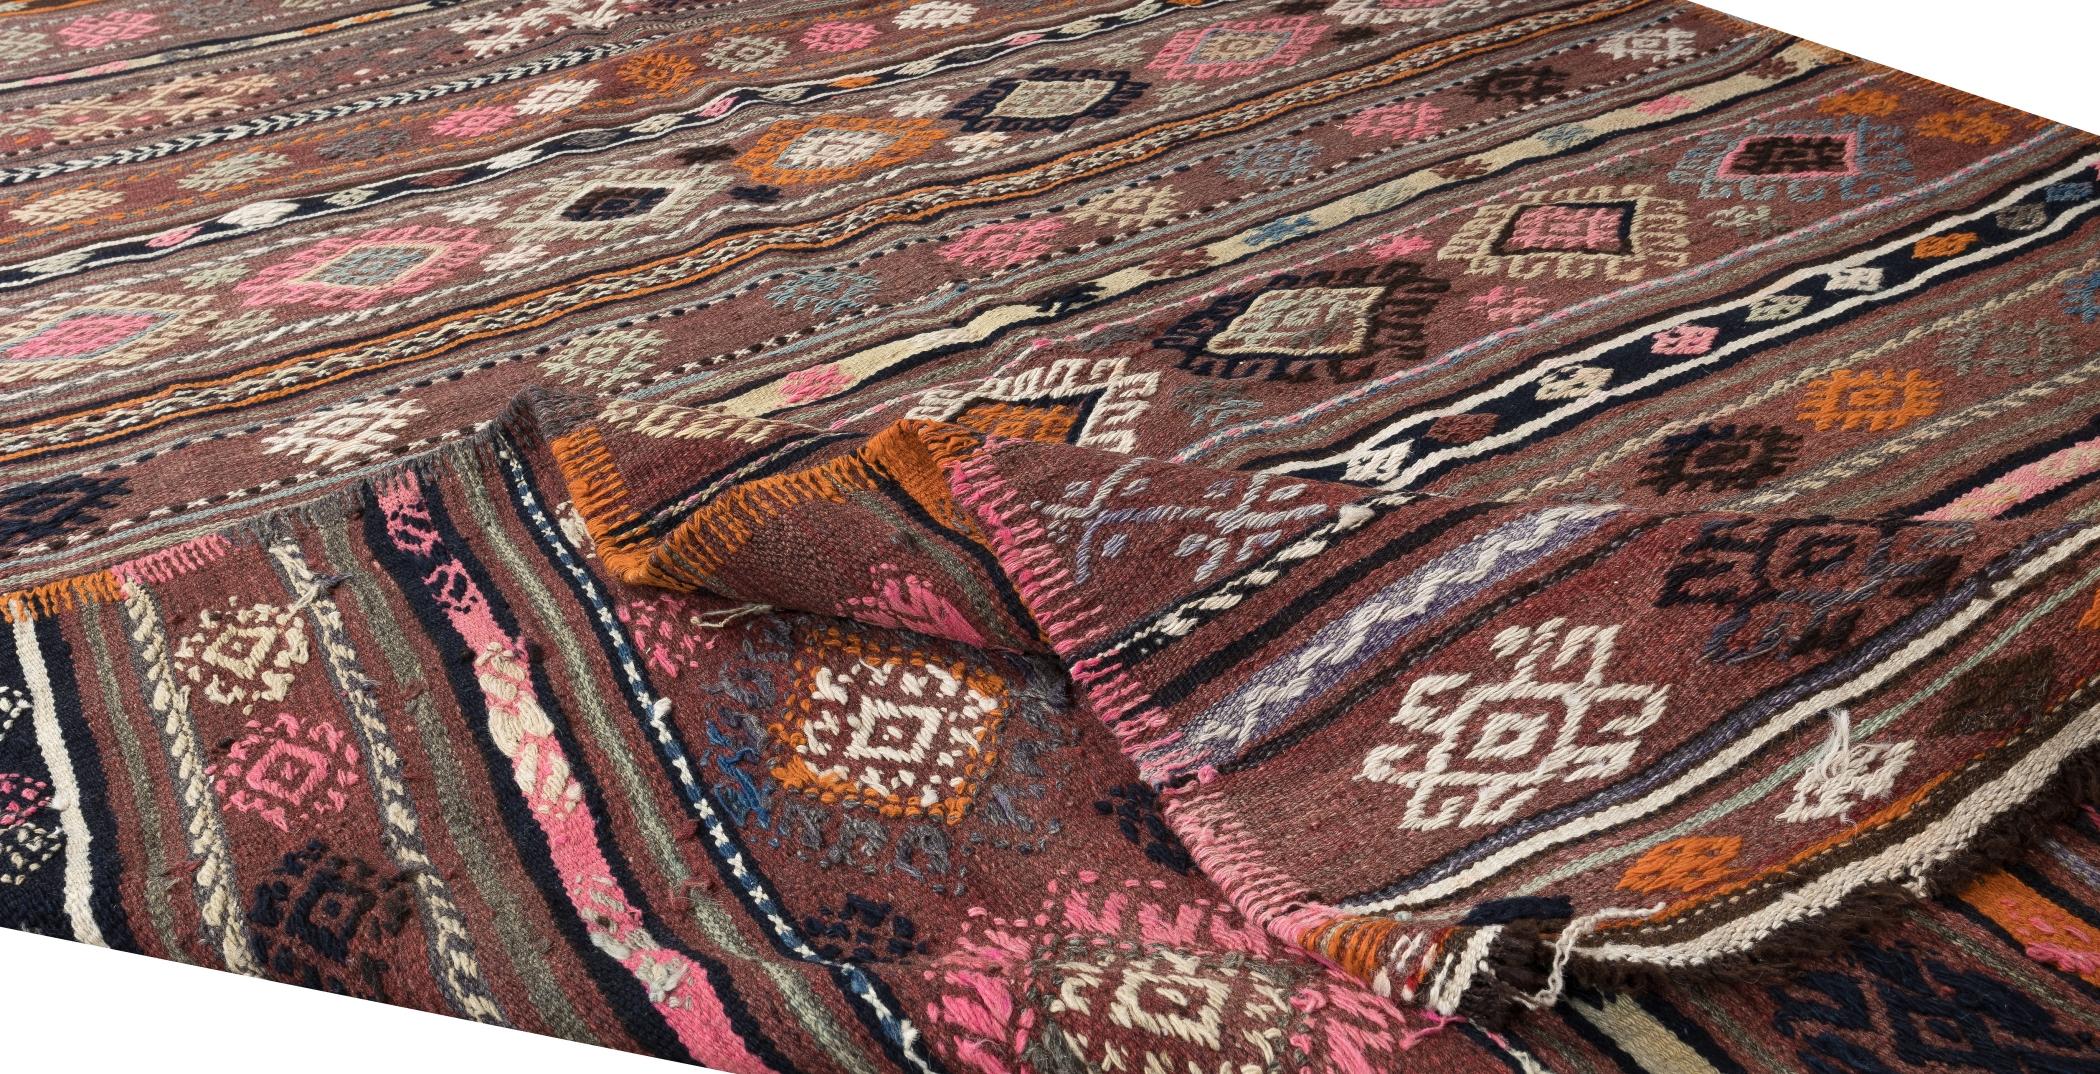 This authentic hand-woven rug made to be used by the villagers in Central Anatolia. 100% organic wool. Good condition and cleaned professionally.
Ideal for both residential and commercial interiors.
We can supply a suitable rug-pad if requested for